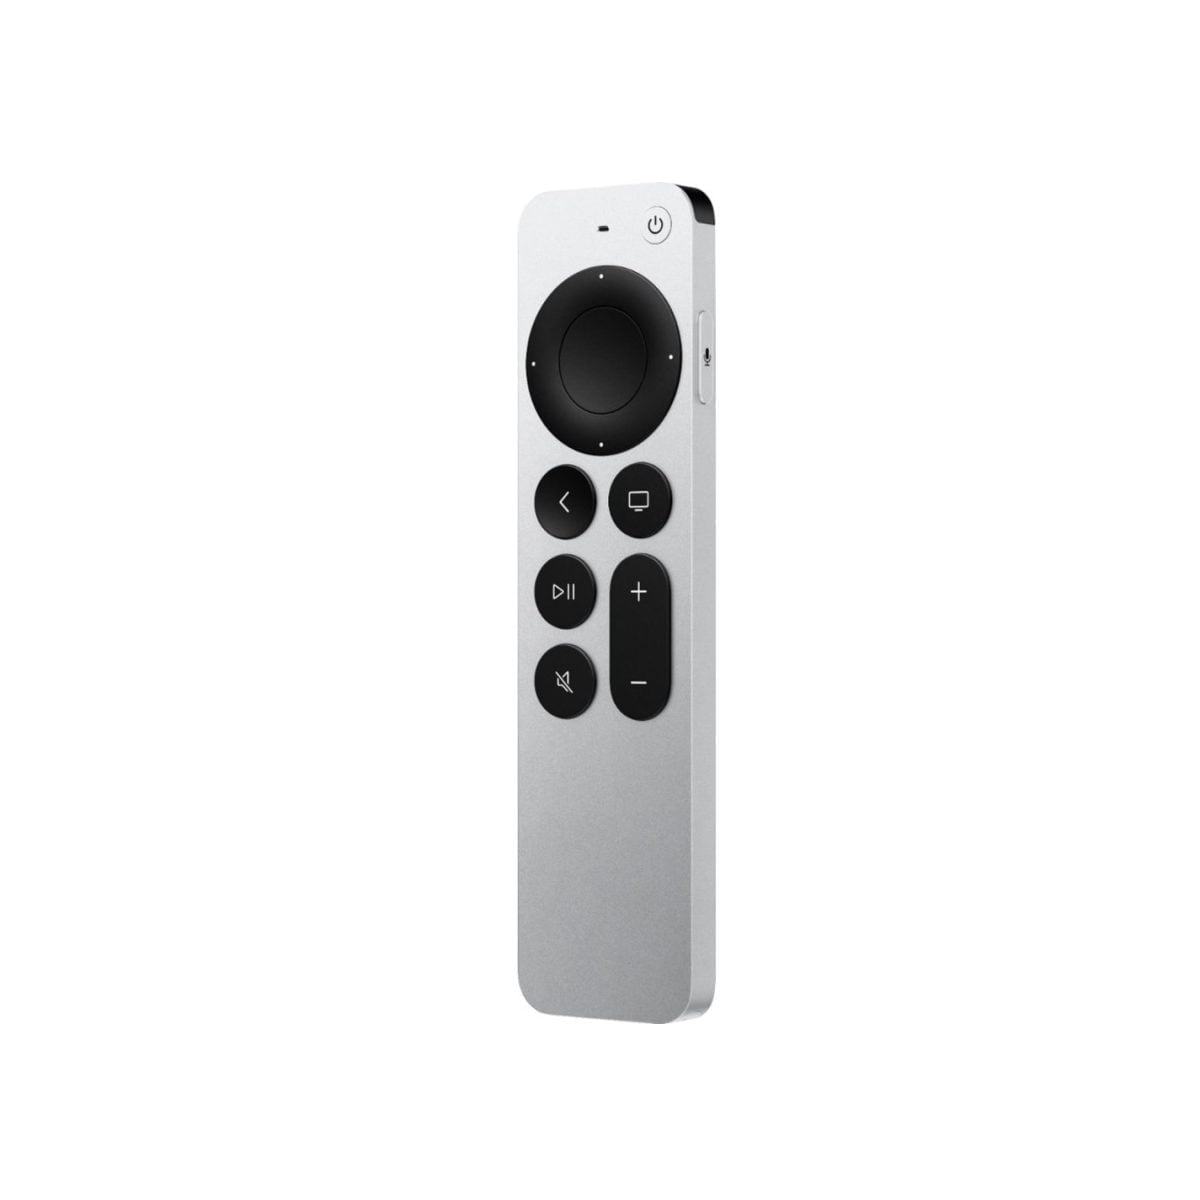 6342364Cv13D 1 Apple &Lt;H1&Gt;Apple Tv 4K - 64Gb 2Nd Generation Latest Model Mxh02&Lt;/H1&Gt; The New Apple Tv 4K Brings The Best Shows, Movies, Sports, And Live Tv Together With Your Favorite Apple Devices And Services. Now With 4K High Frame Rate Hdr For Fluid, Crisp Video. Watch Apple Originals With Apple Tv+. Experience More Ways To Enjoy Your Tv With Apple Arcade, Apple Fitness+, And Apple Music. And Use The New Siri Remote With A Touch-Enabled Clickpad To Control It All. Take Entertainment To Next Level By Bringing Home The Next-Generation Apple Tv 4K With 64 Gb Storage, A Higher Definition Of Tv. The Best Of Tv Together With Your Favorite Apple Devices And Services Will Transform Your Living Room And Elevate Your Entertainment. Apple Tv Apple Tv 4K - 64Gb 2Nd Generation Latest Model Mxh02